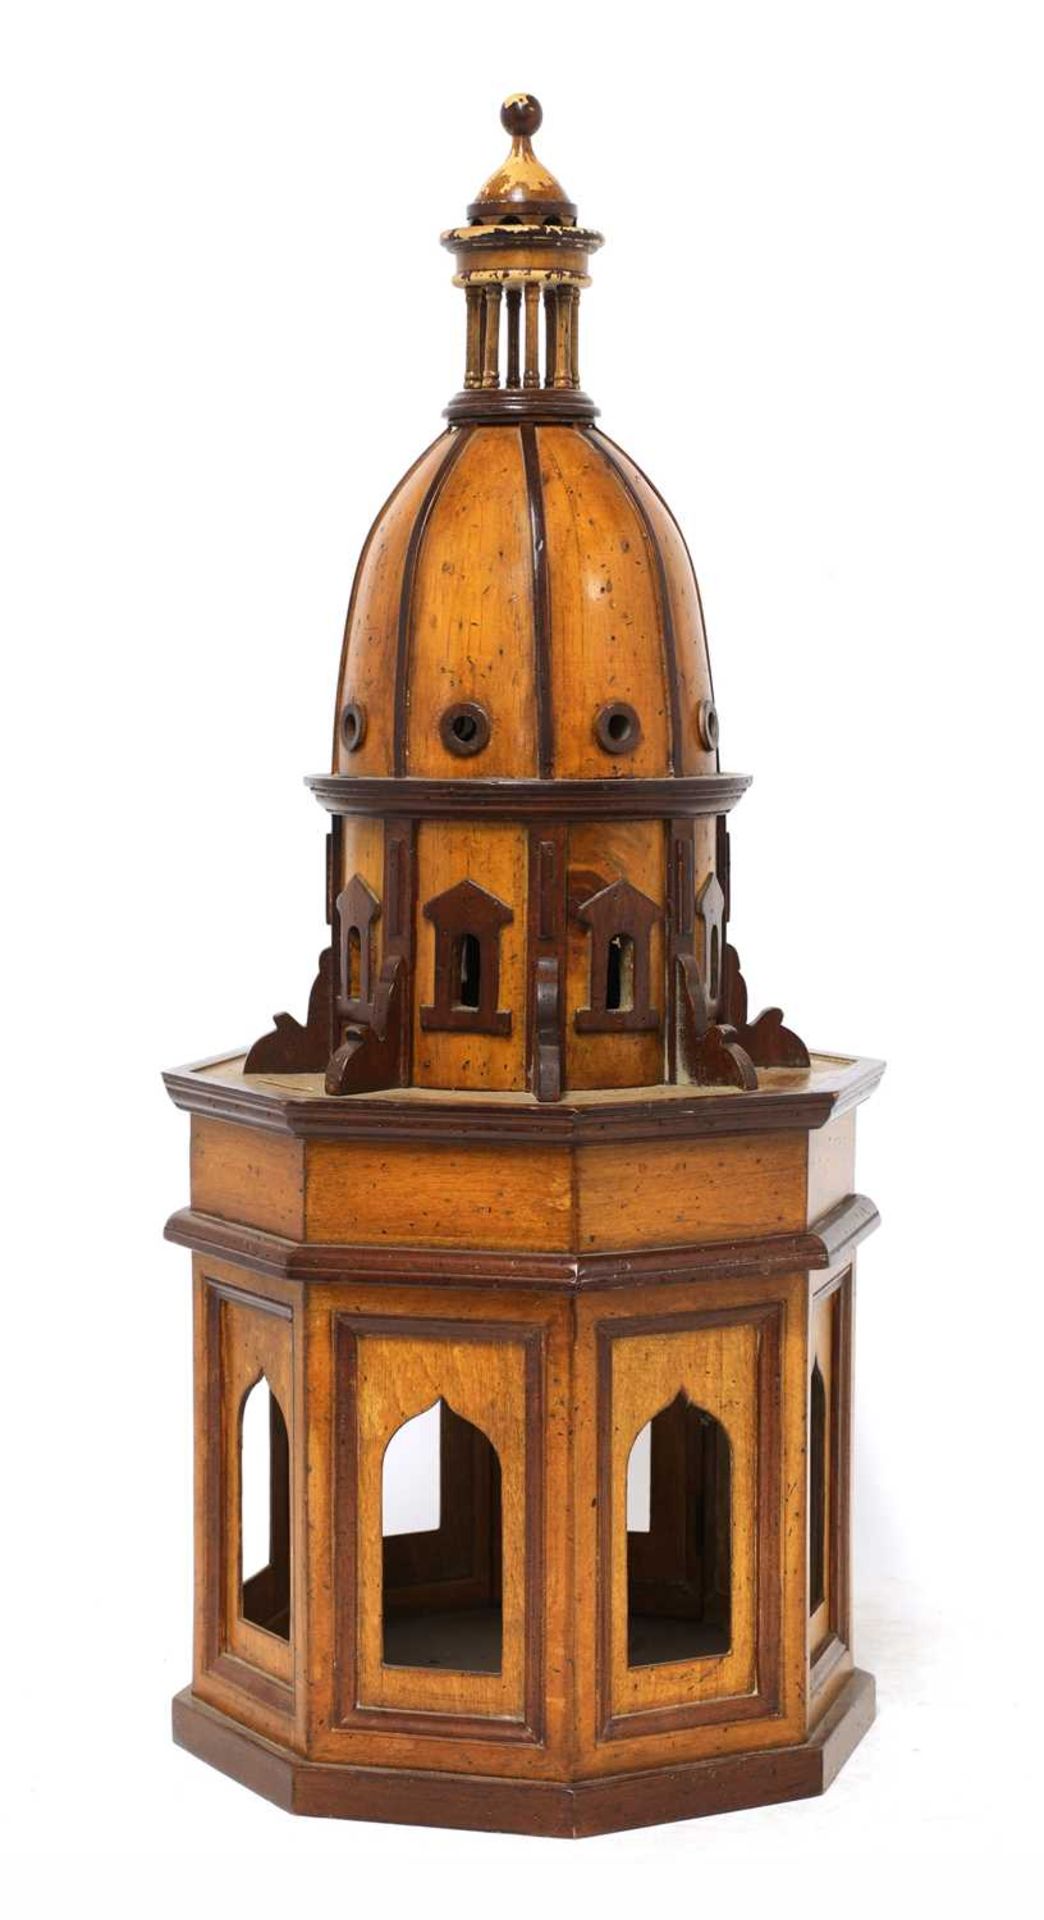 An architectural model dome and cupola,